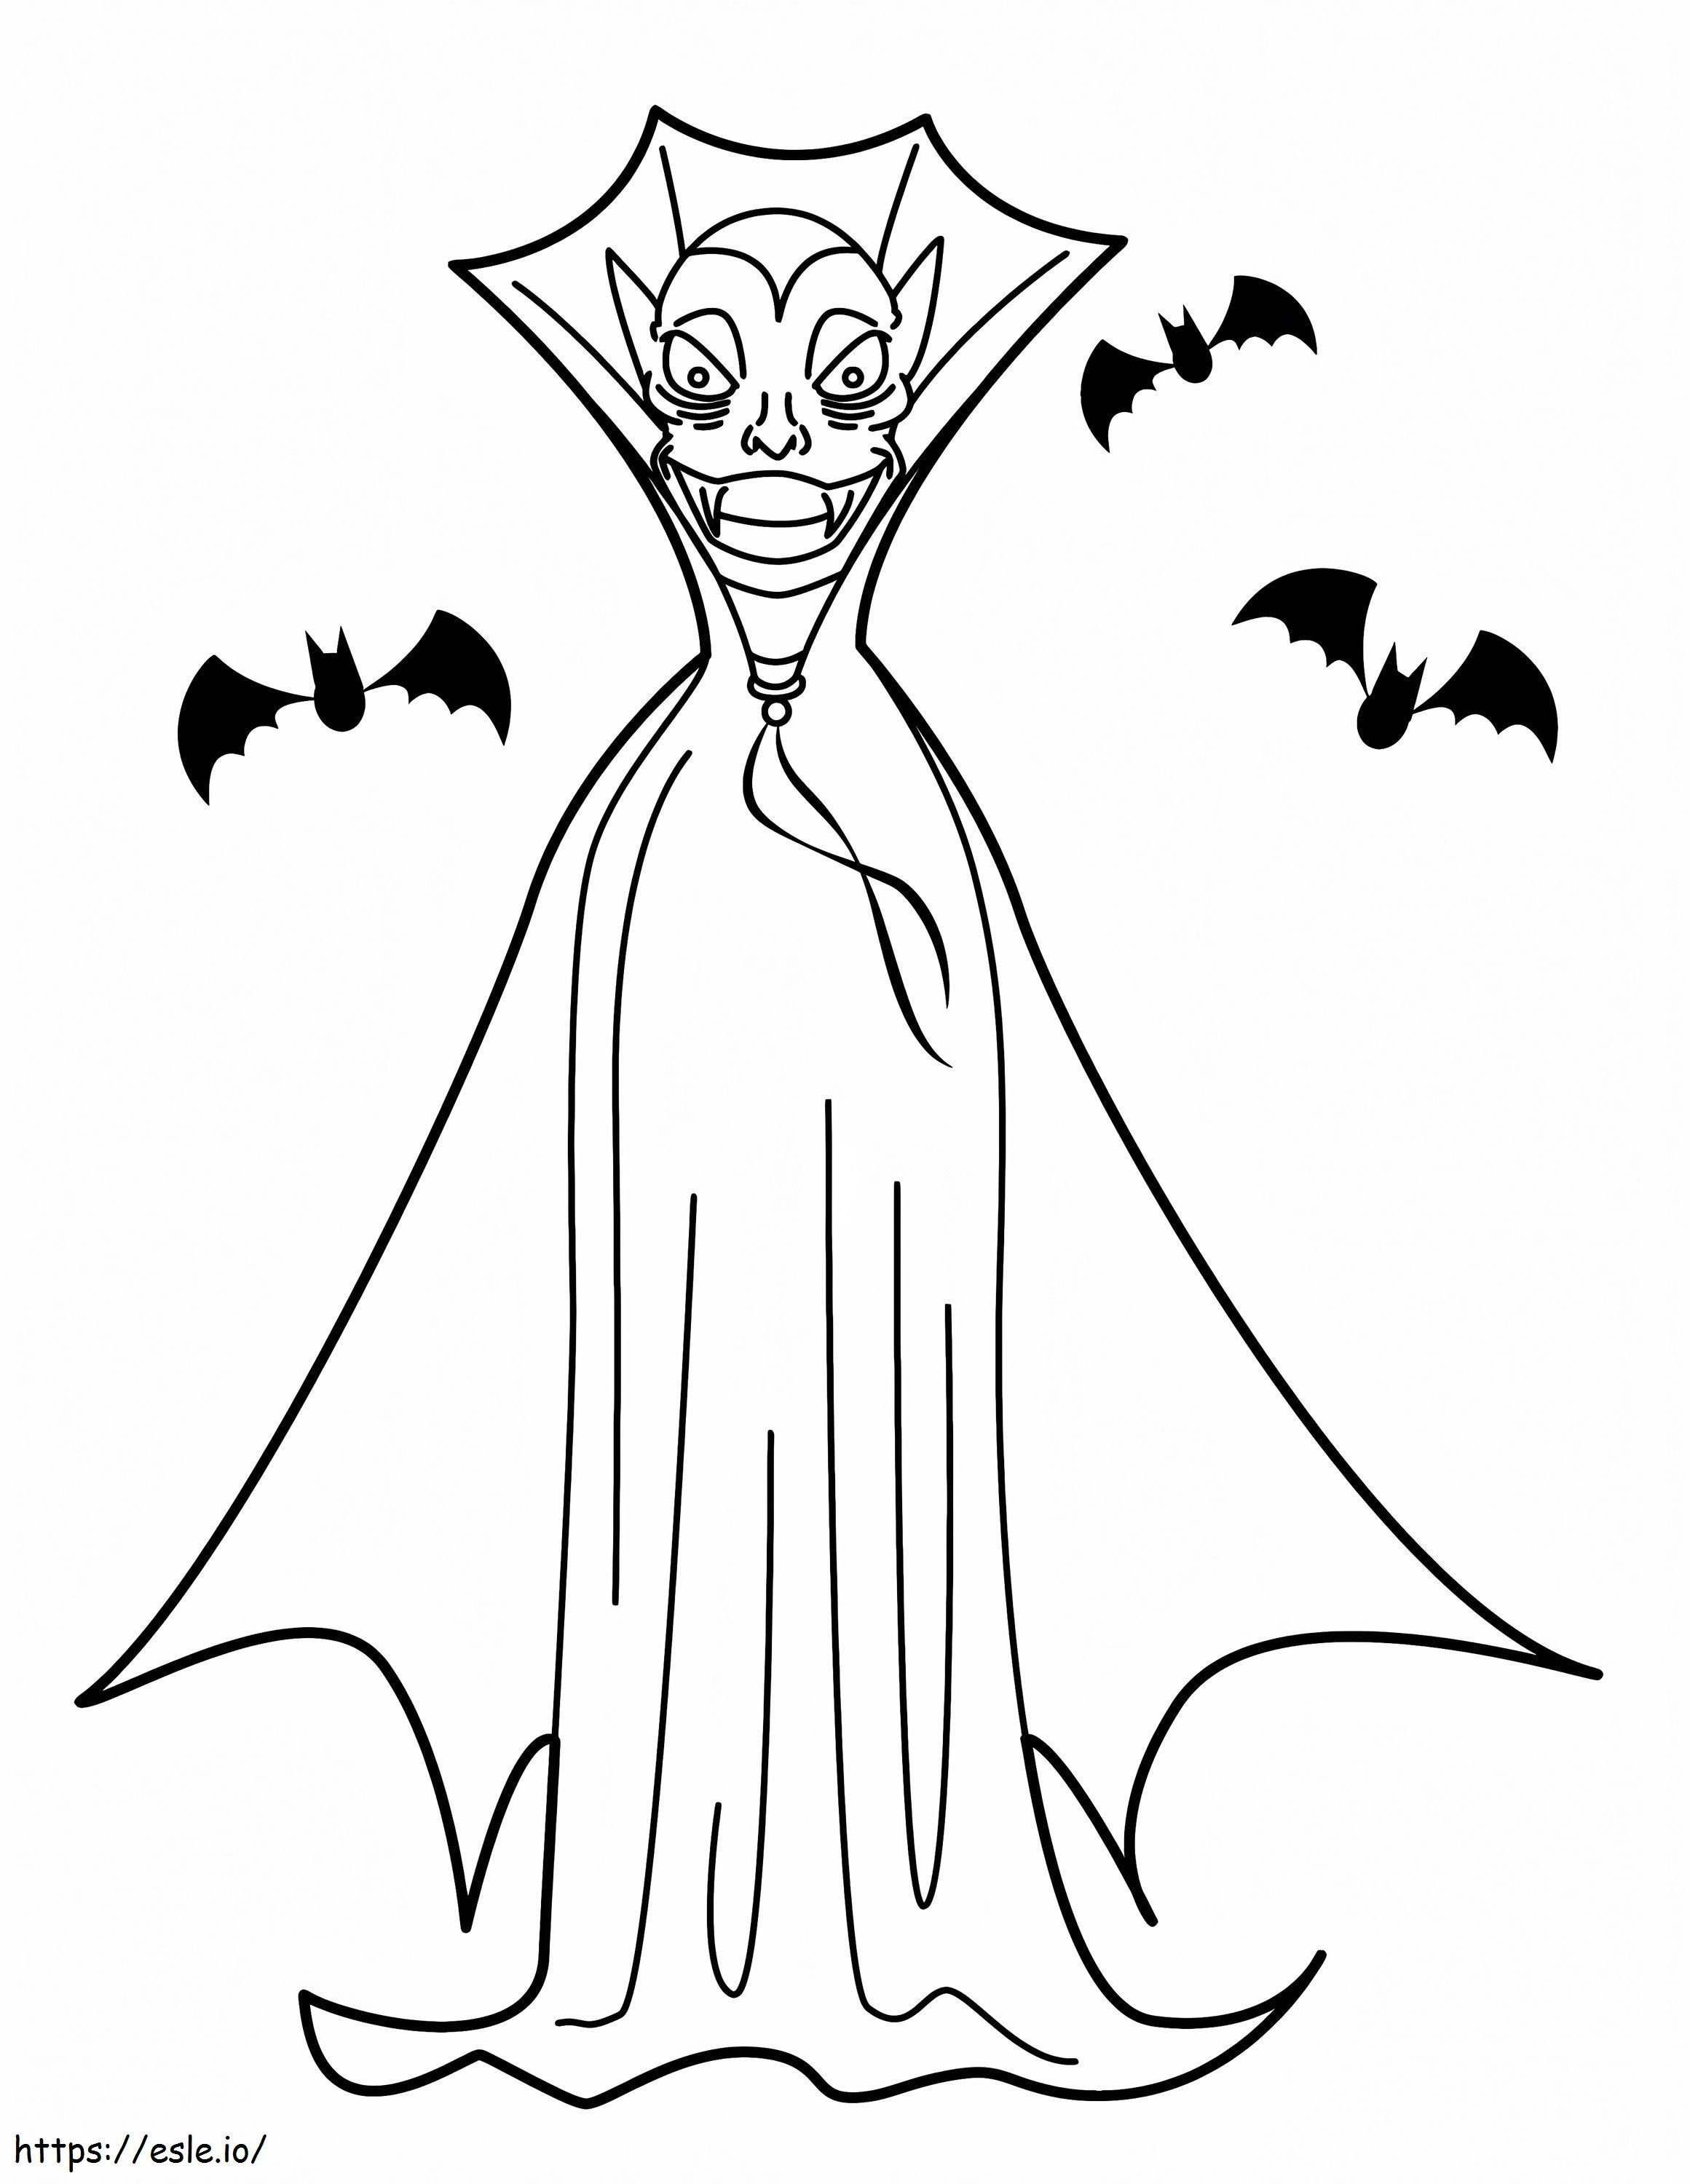 King Of Vampire coloring page